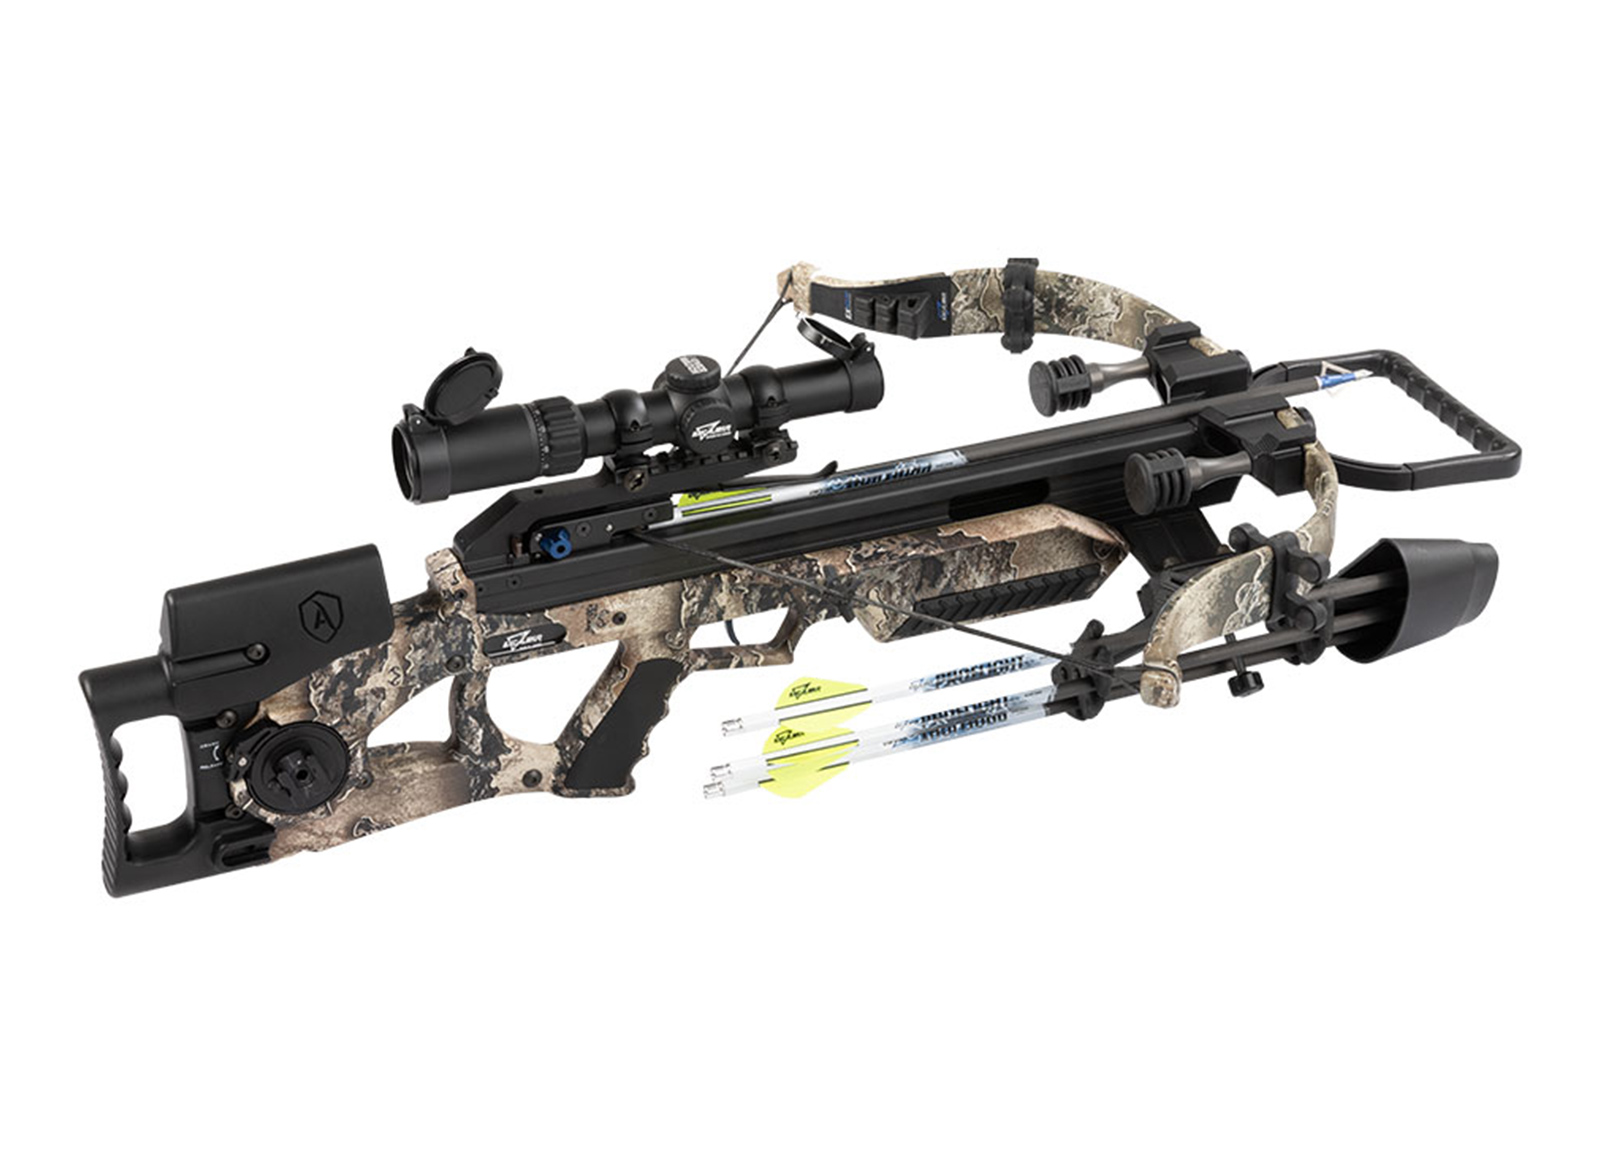 EXCALIBUR BALESTRA ASSASSIN EXTREME CAMO PACKAGE  WITH OVERWATCH SCOPE